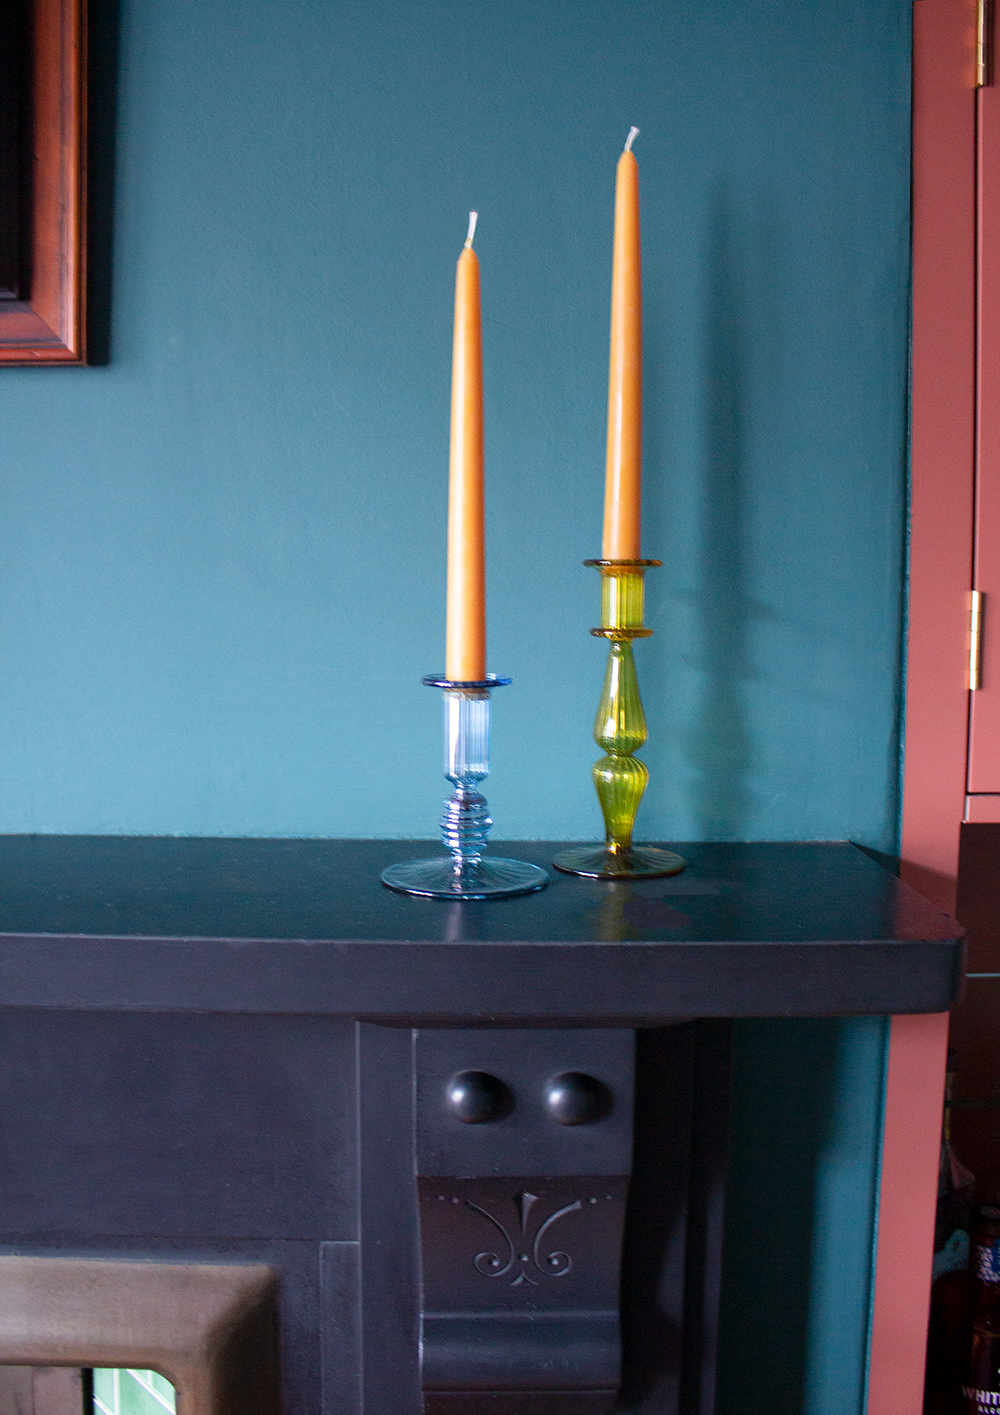 A close up photo of the ribbed glass candlesticks with caramel coloured candles.